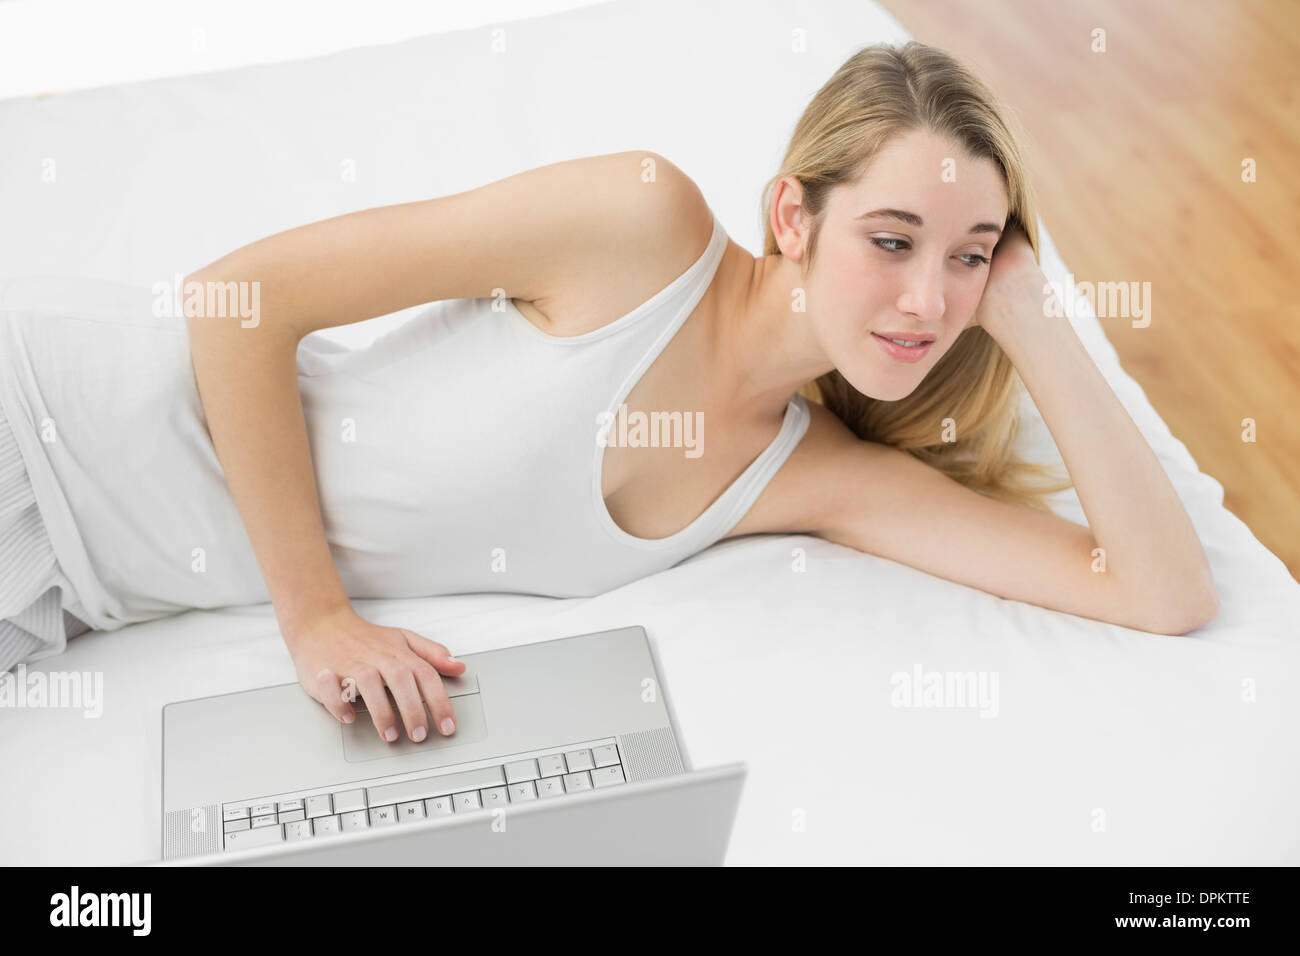 Thoughtful calm woman using her notebook lying on her bed Stock Photo